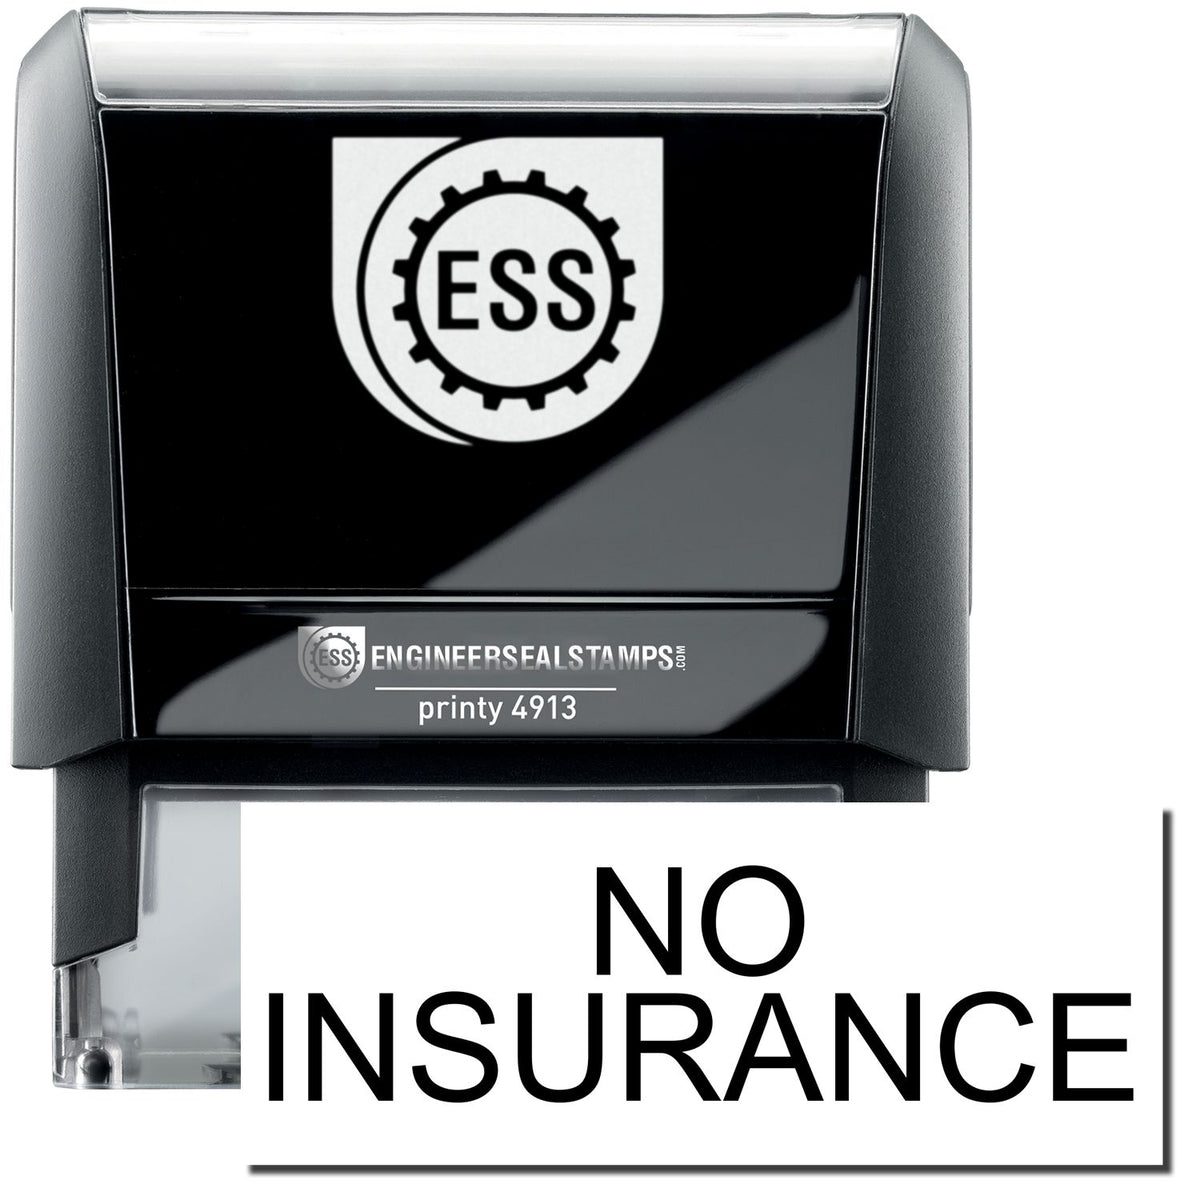 A self-inking stamp with a stamped image showing how the text &quot;NO INSURANCE&quot; in a large bold font is displayed by it.